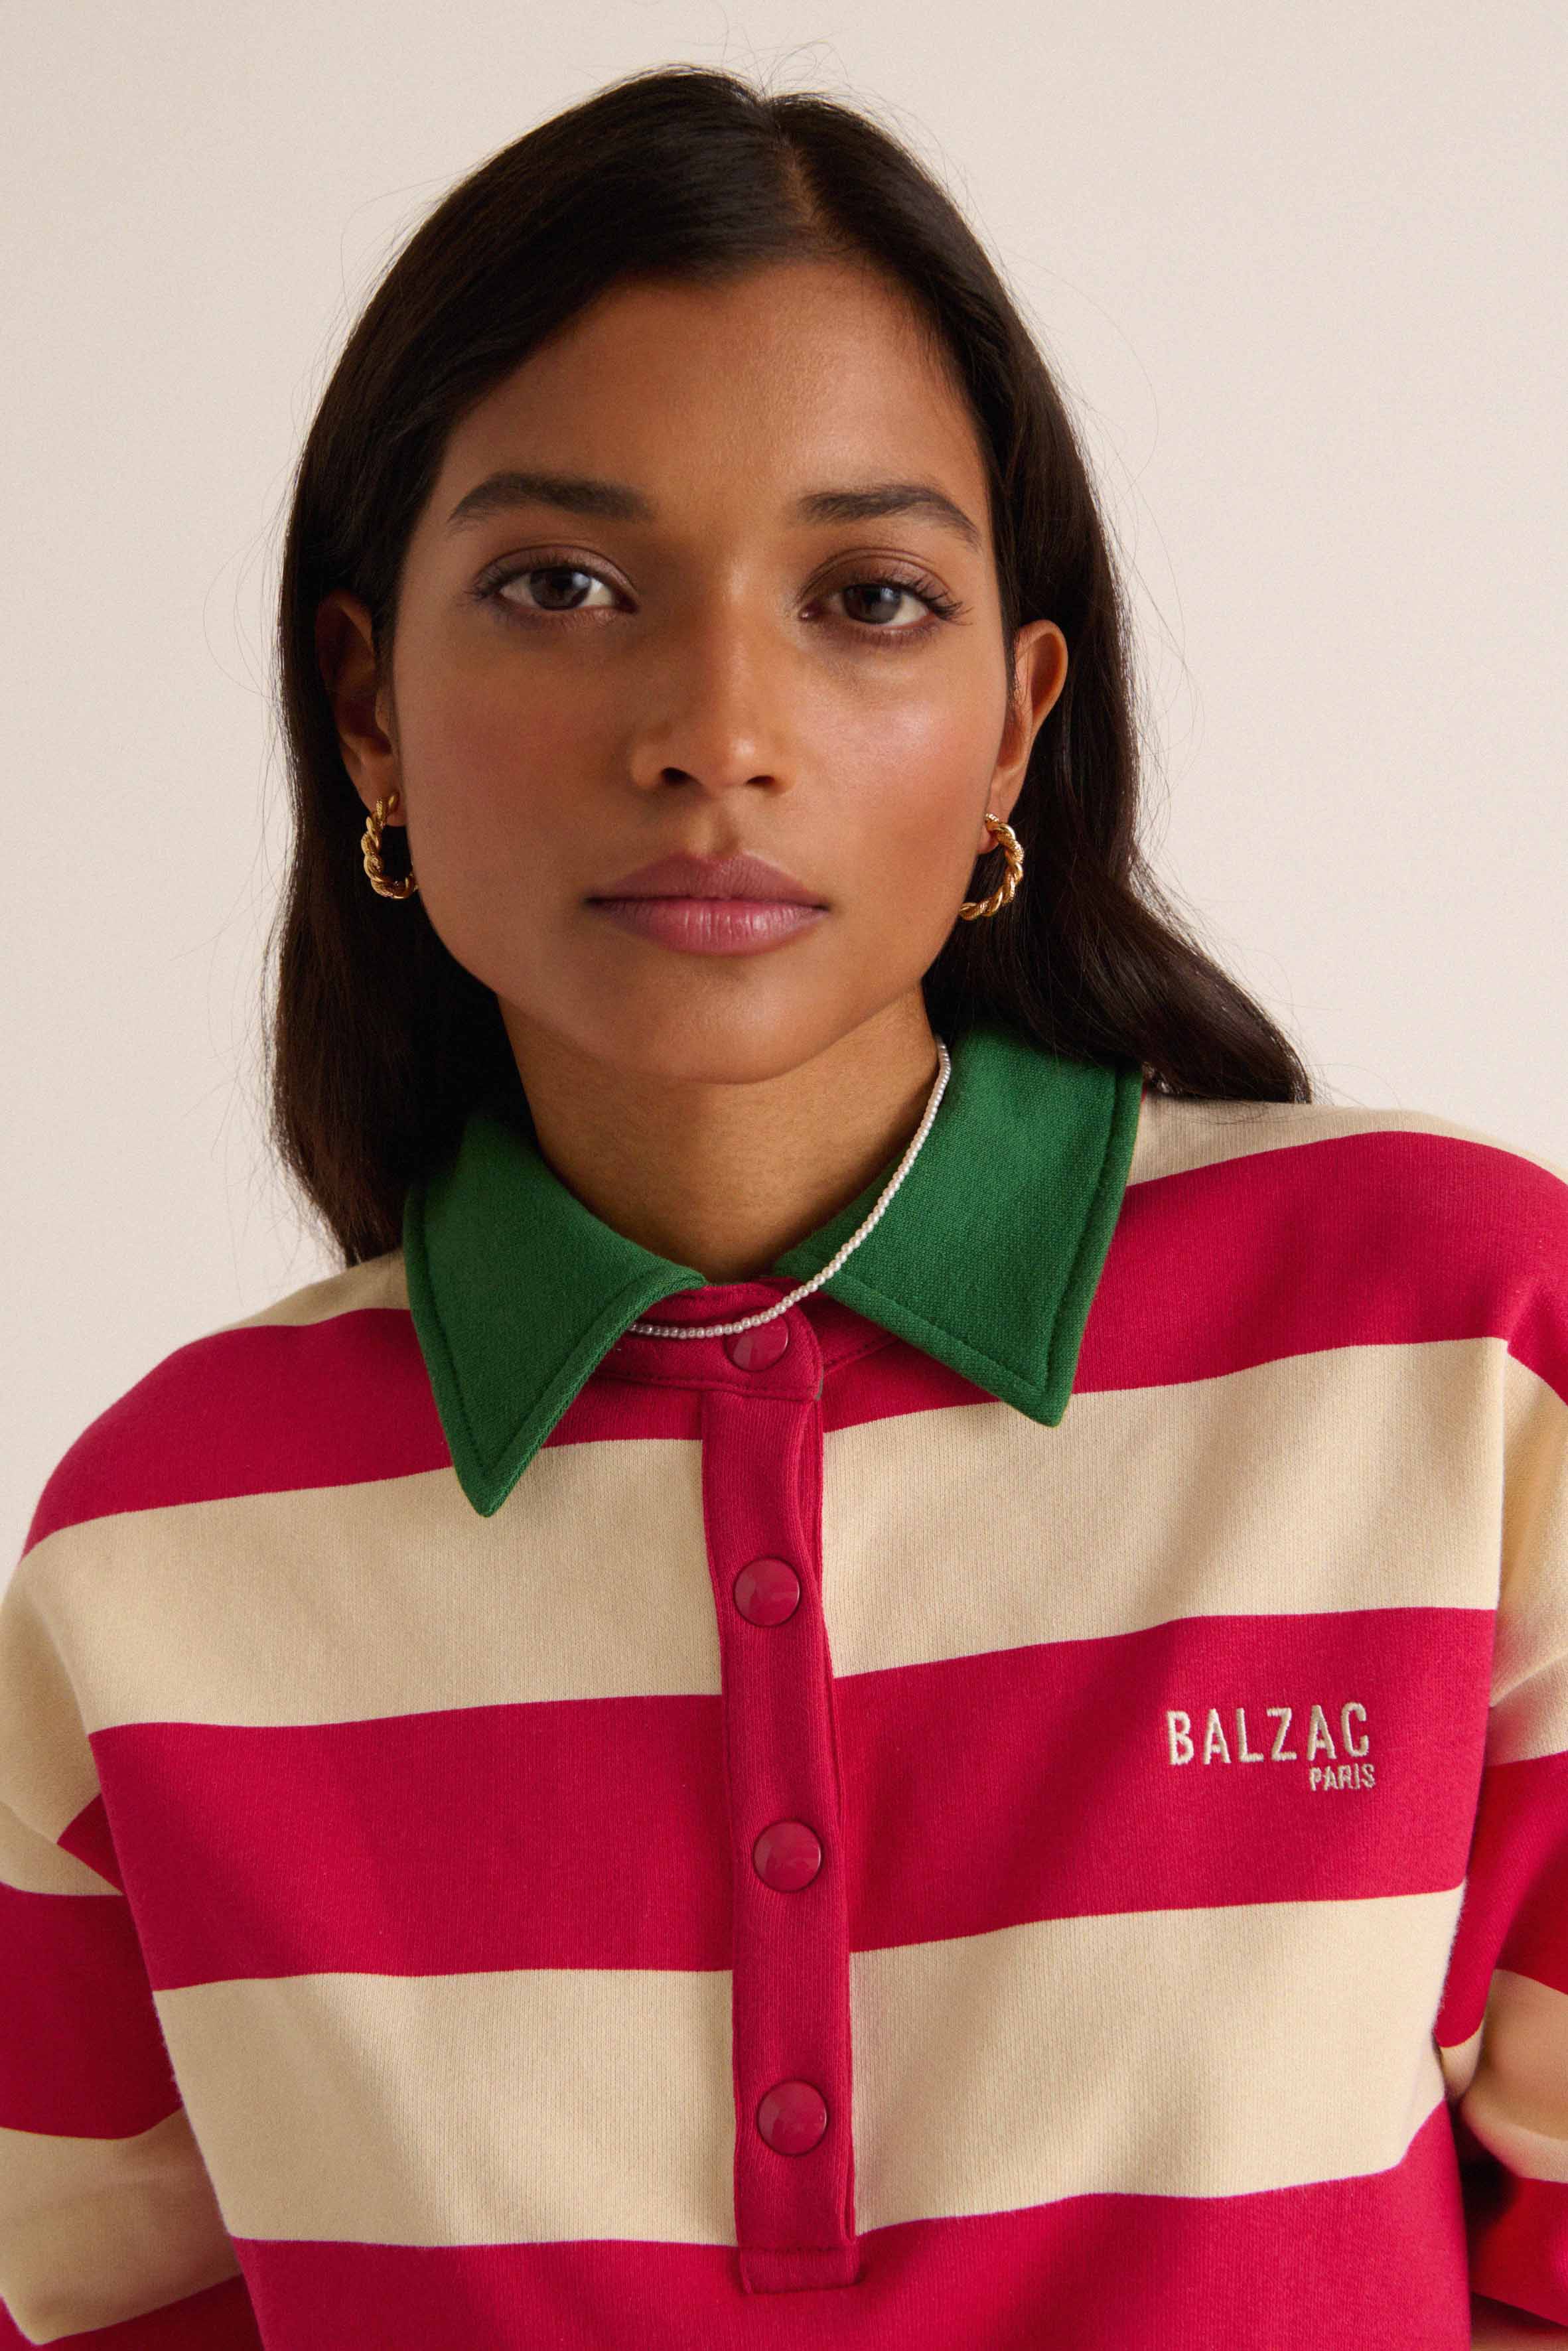 Alvar sweatshirt with pink and green stripes